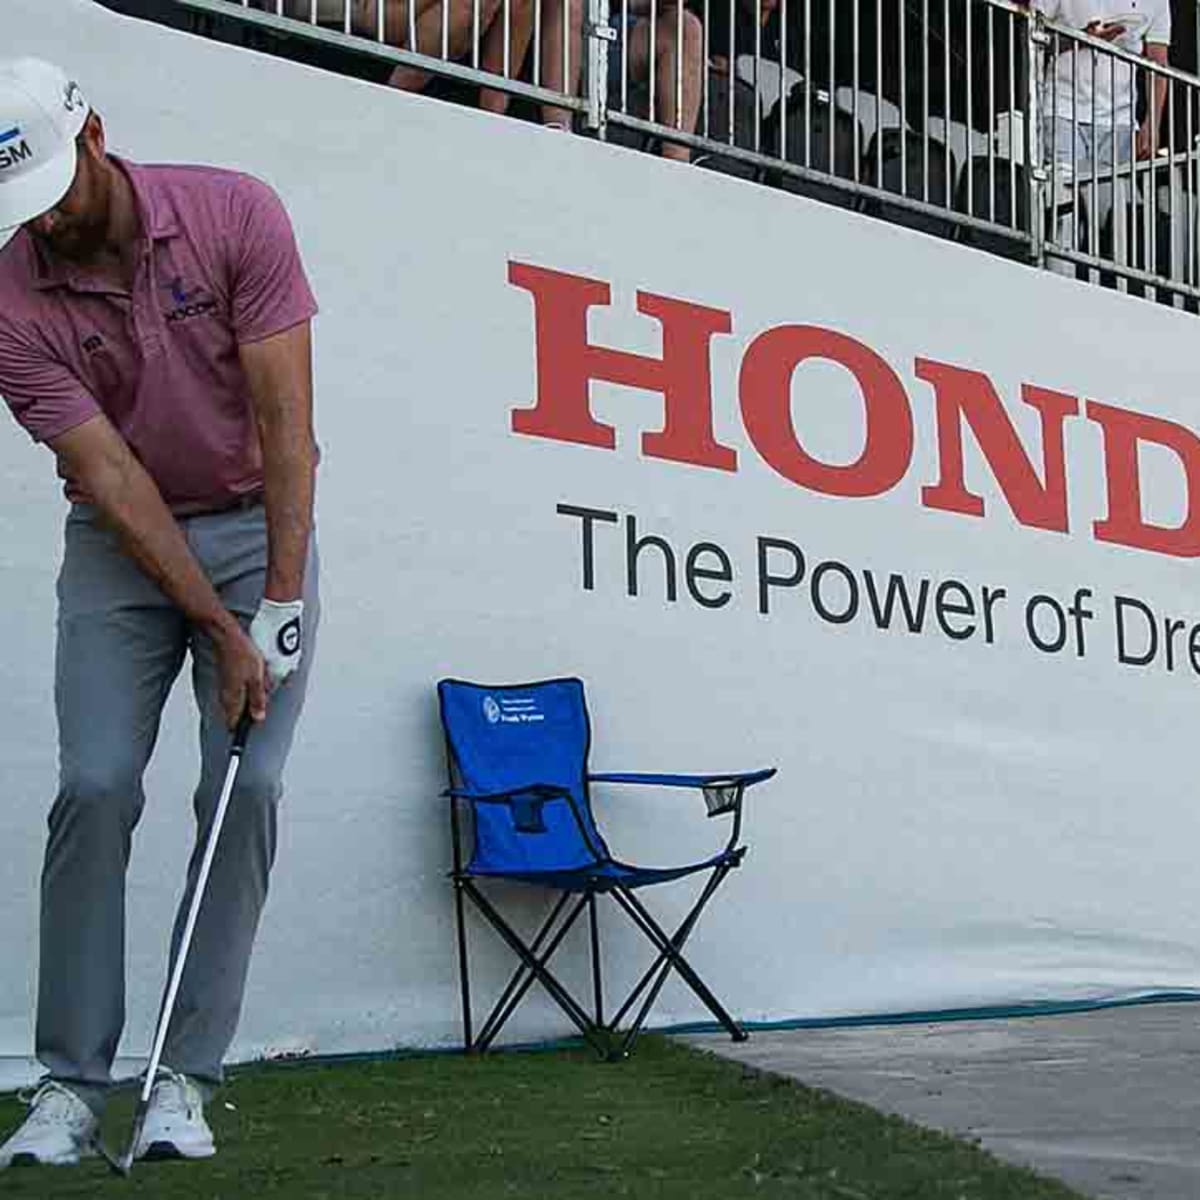 The Honda Classic is done, but maybe not gone forever